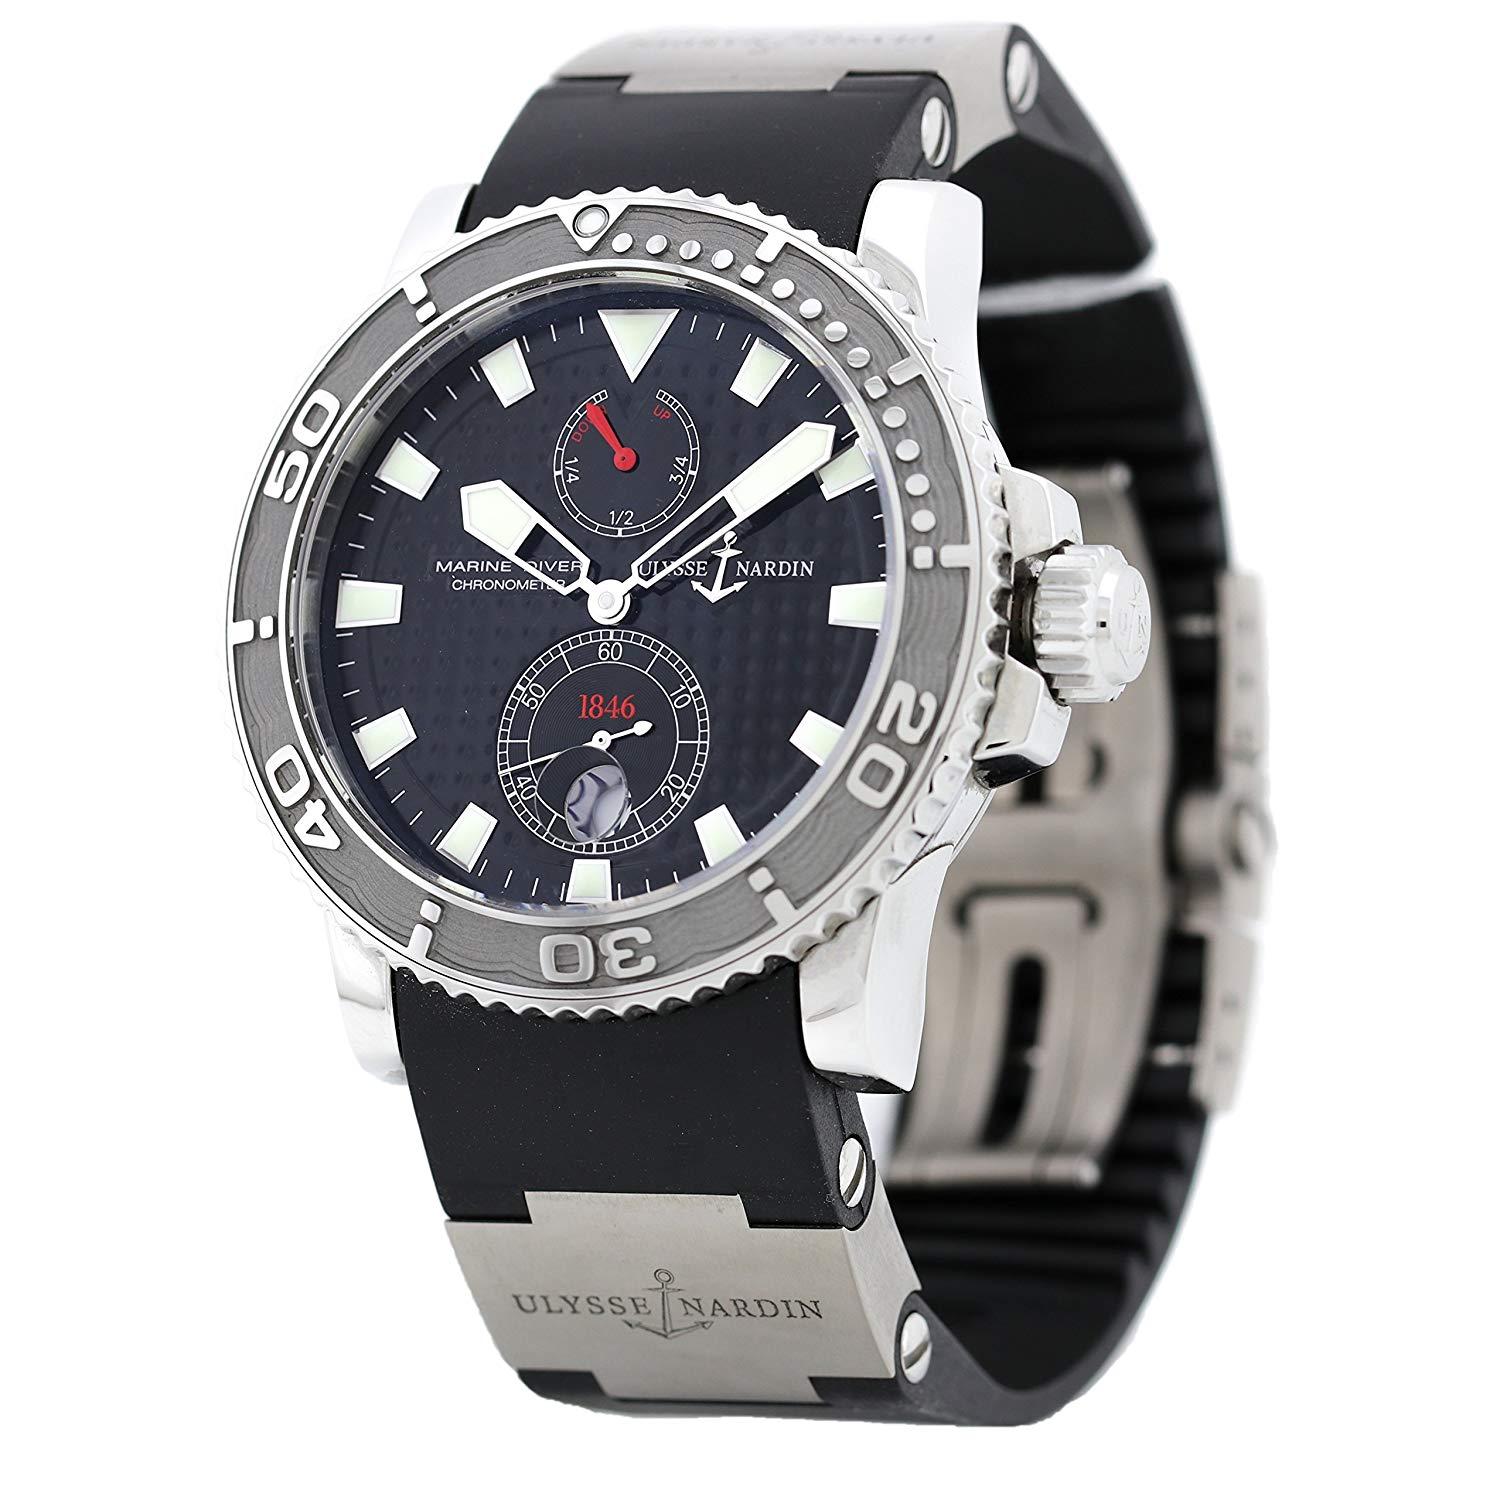 ULYSSE NARDIN MAXI MARINE DIVER CHRONOMETER 263-33
*Mint condition wristwatch with box and papers.

Ref: 263-33-3/92
Bezel: Uni-Directional
Case: Stainless Steel
Case Diameter: 42.8mm
Band: Rubber with Stainless Steel Folding Clasp
Movement: